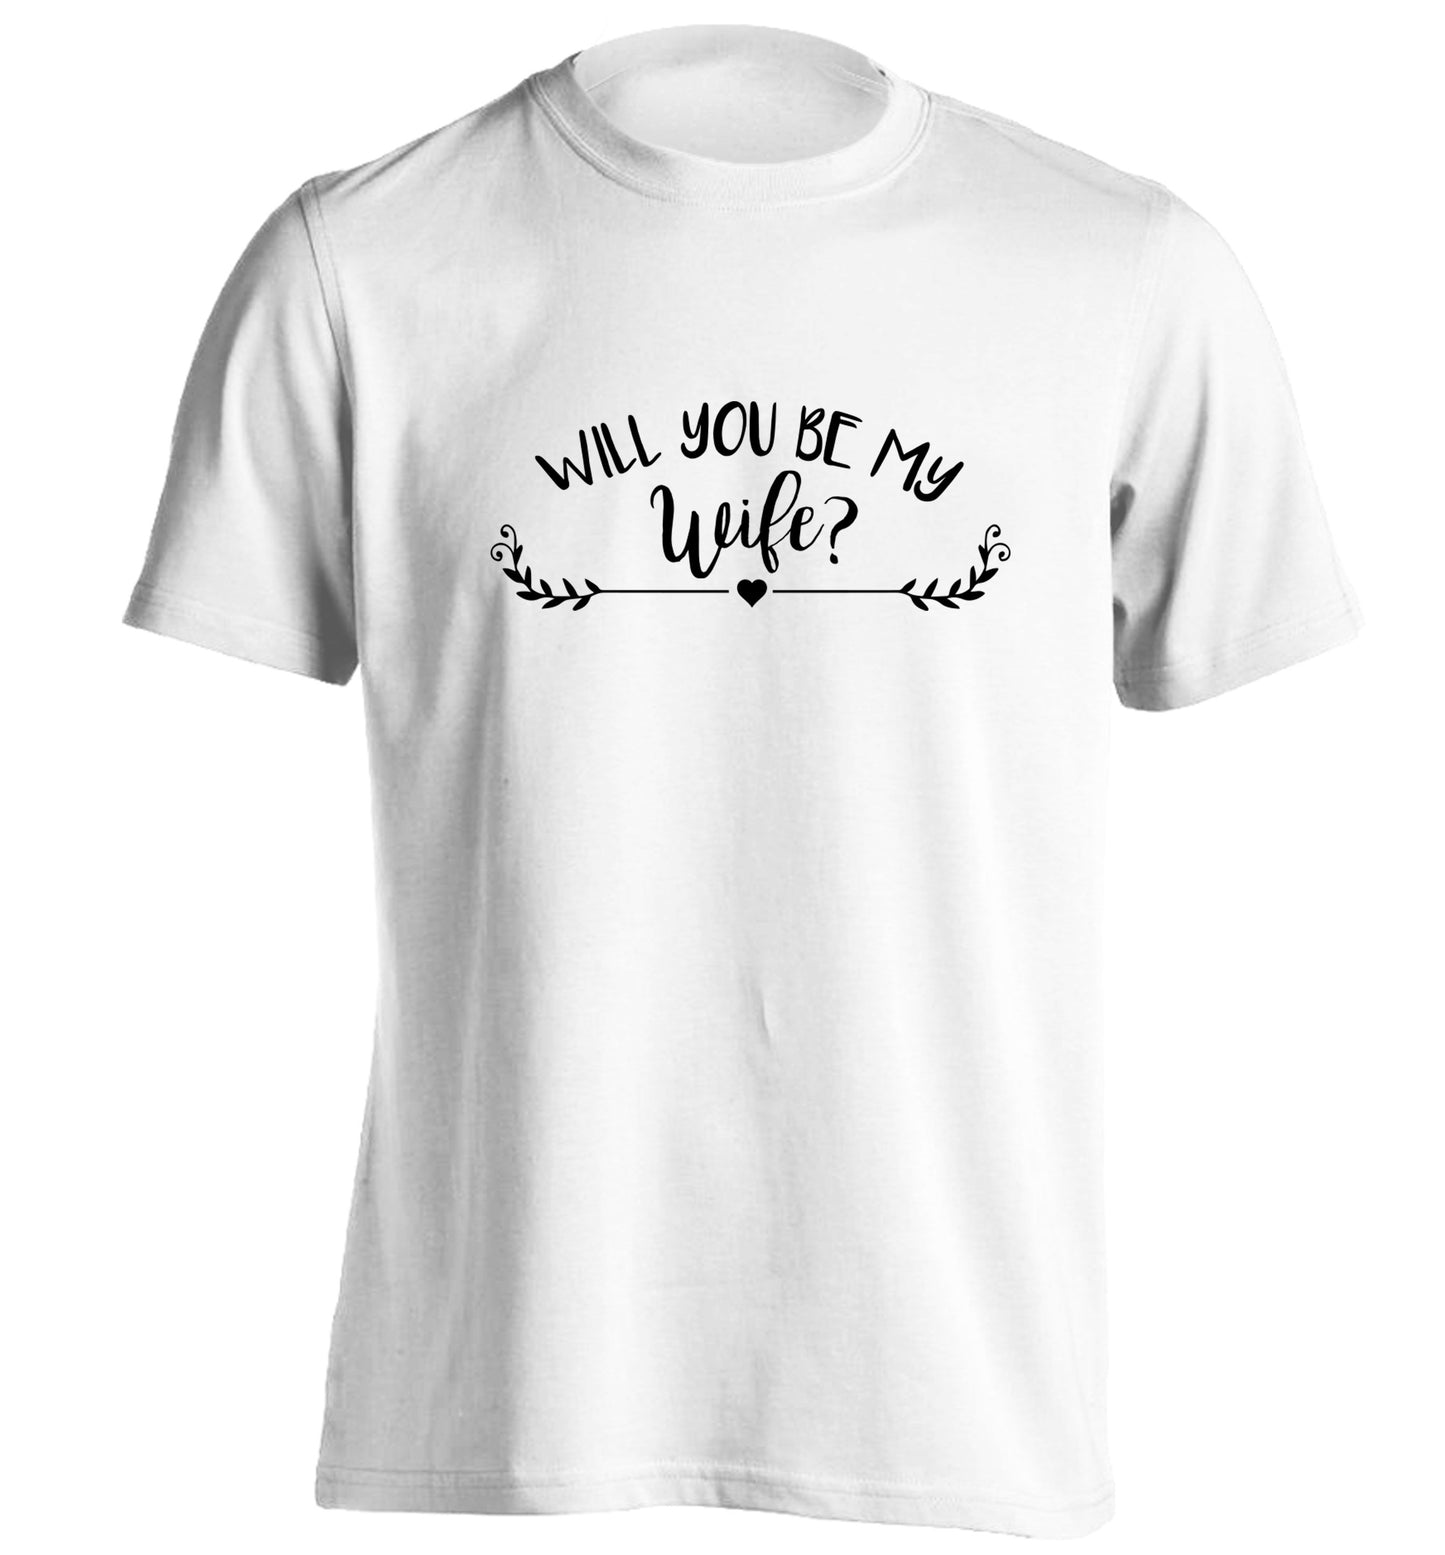 Will you be my wife? adults unisex white Tshirt 2XL